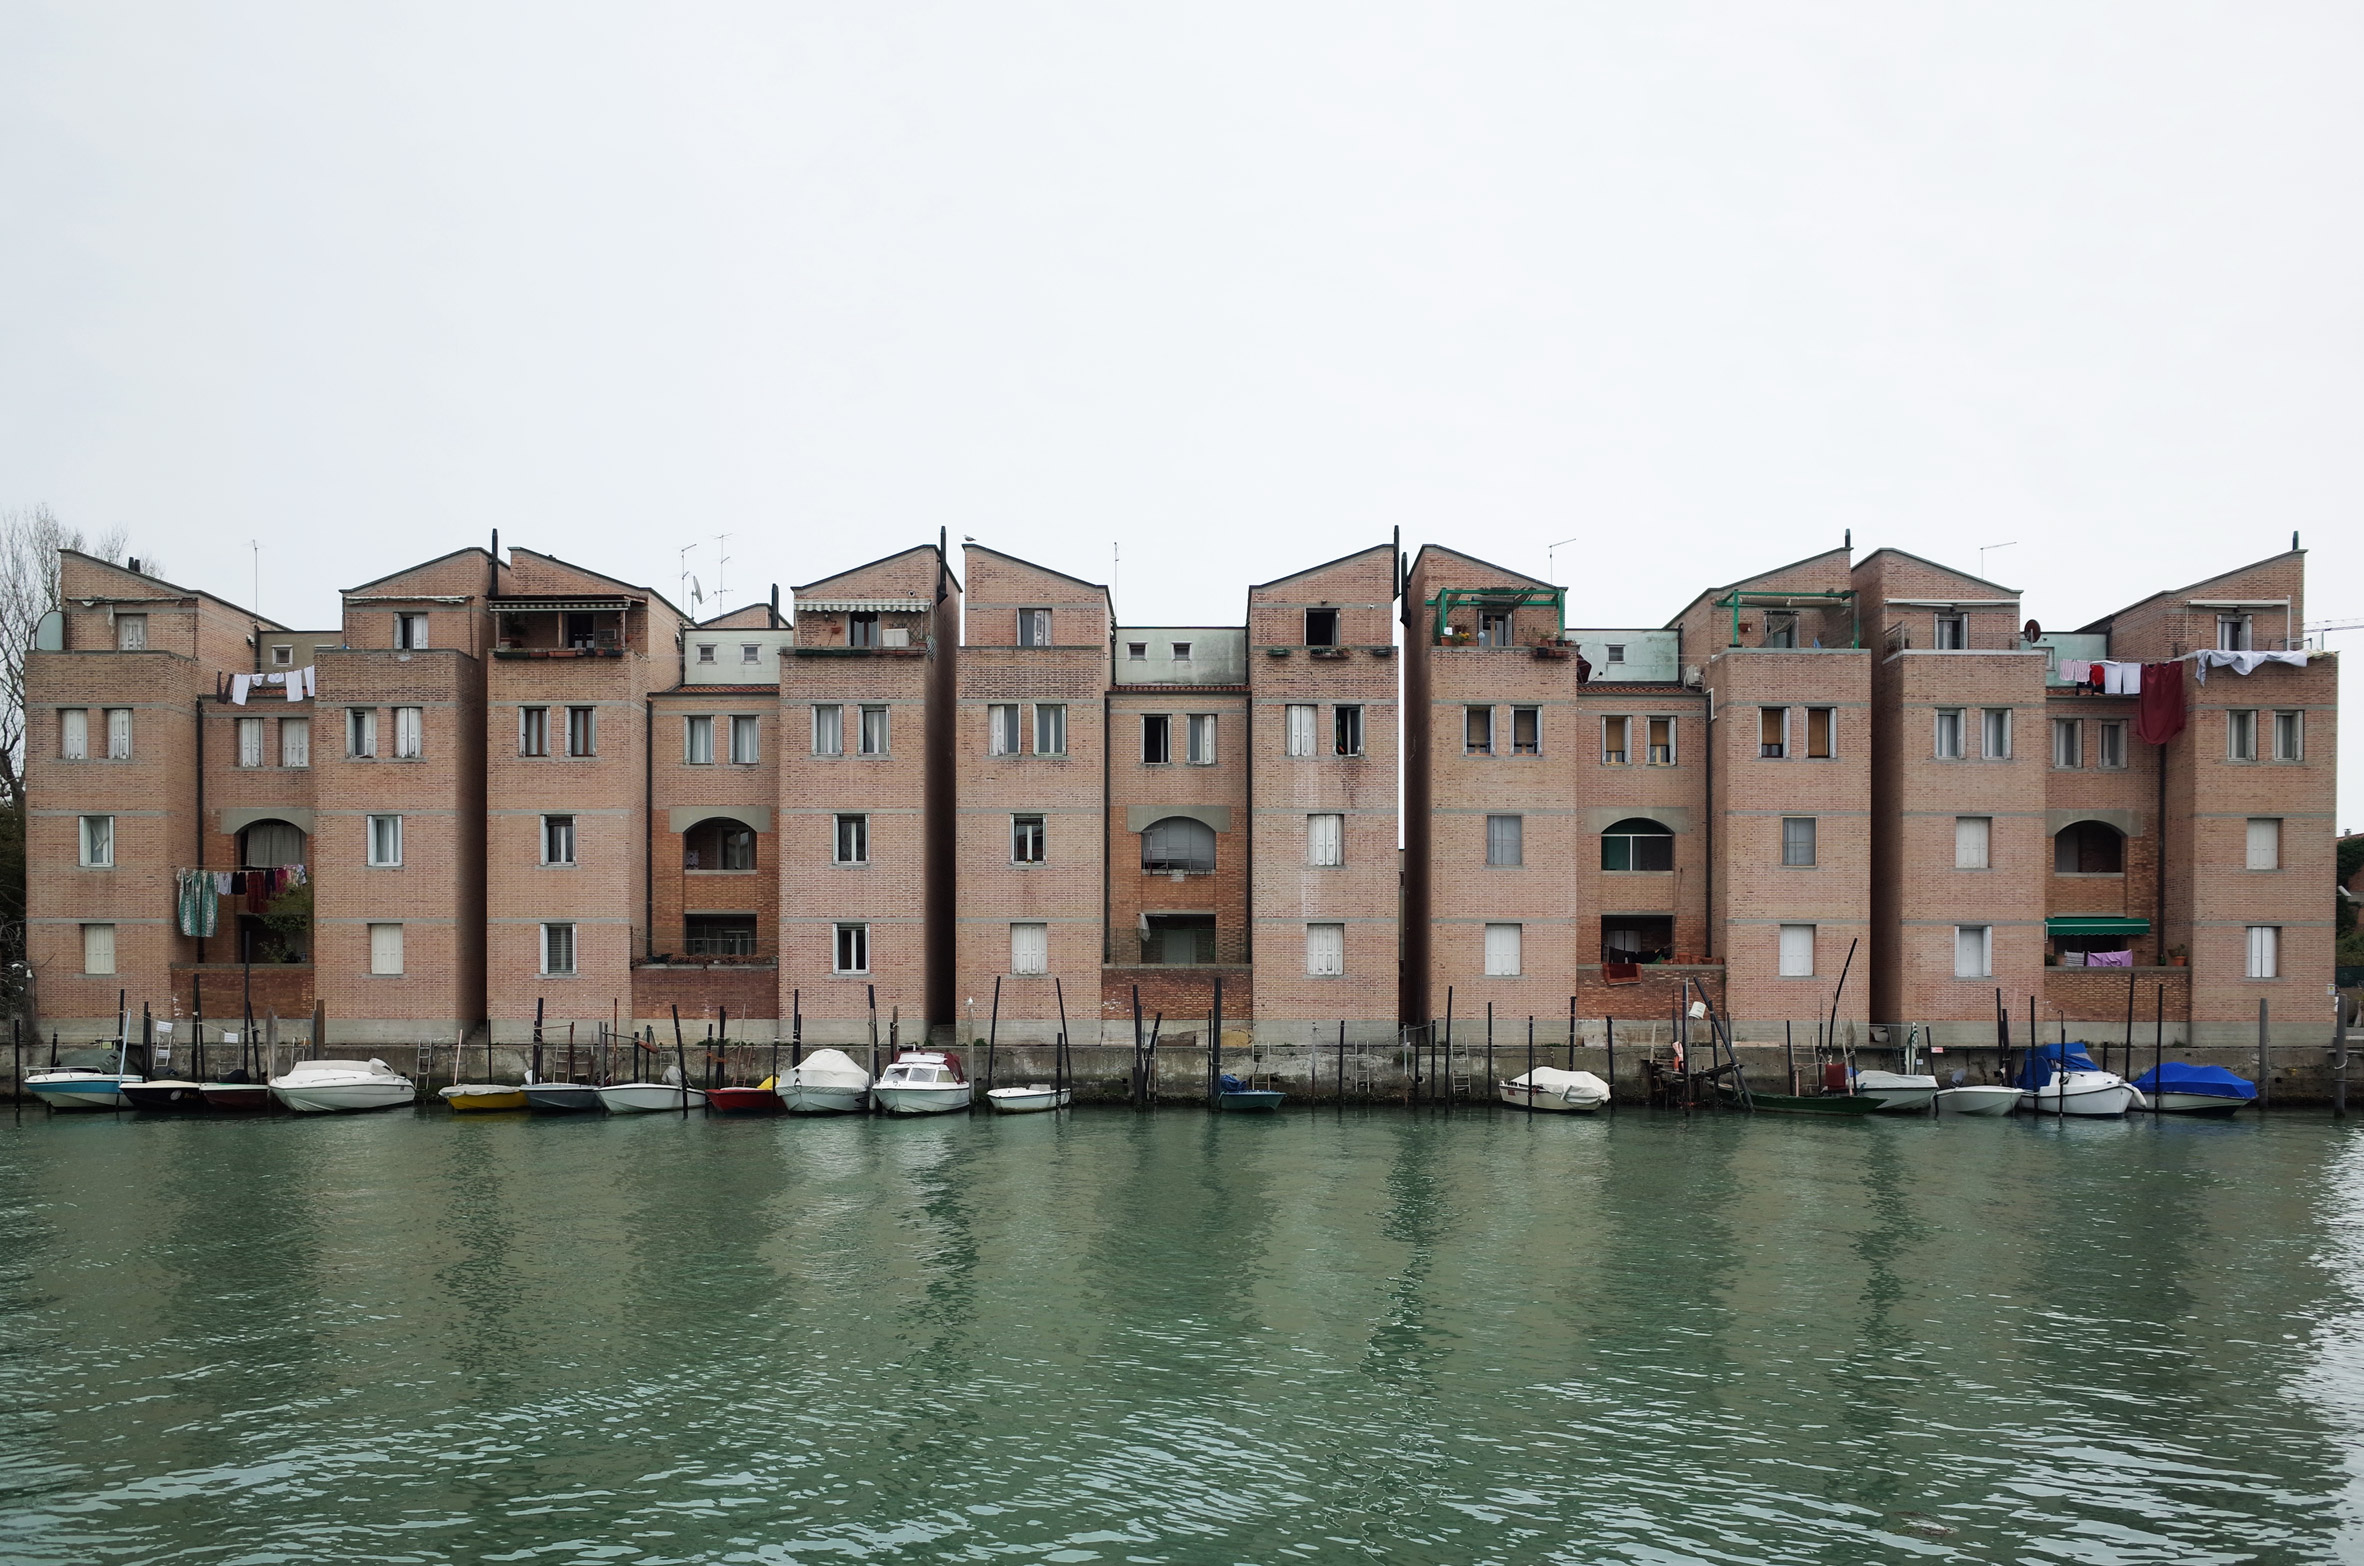 Venice Biennale project sees derelict 1980s flat transformed back into family home